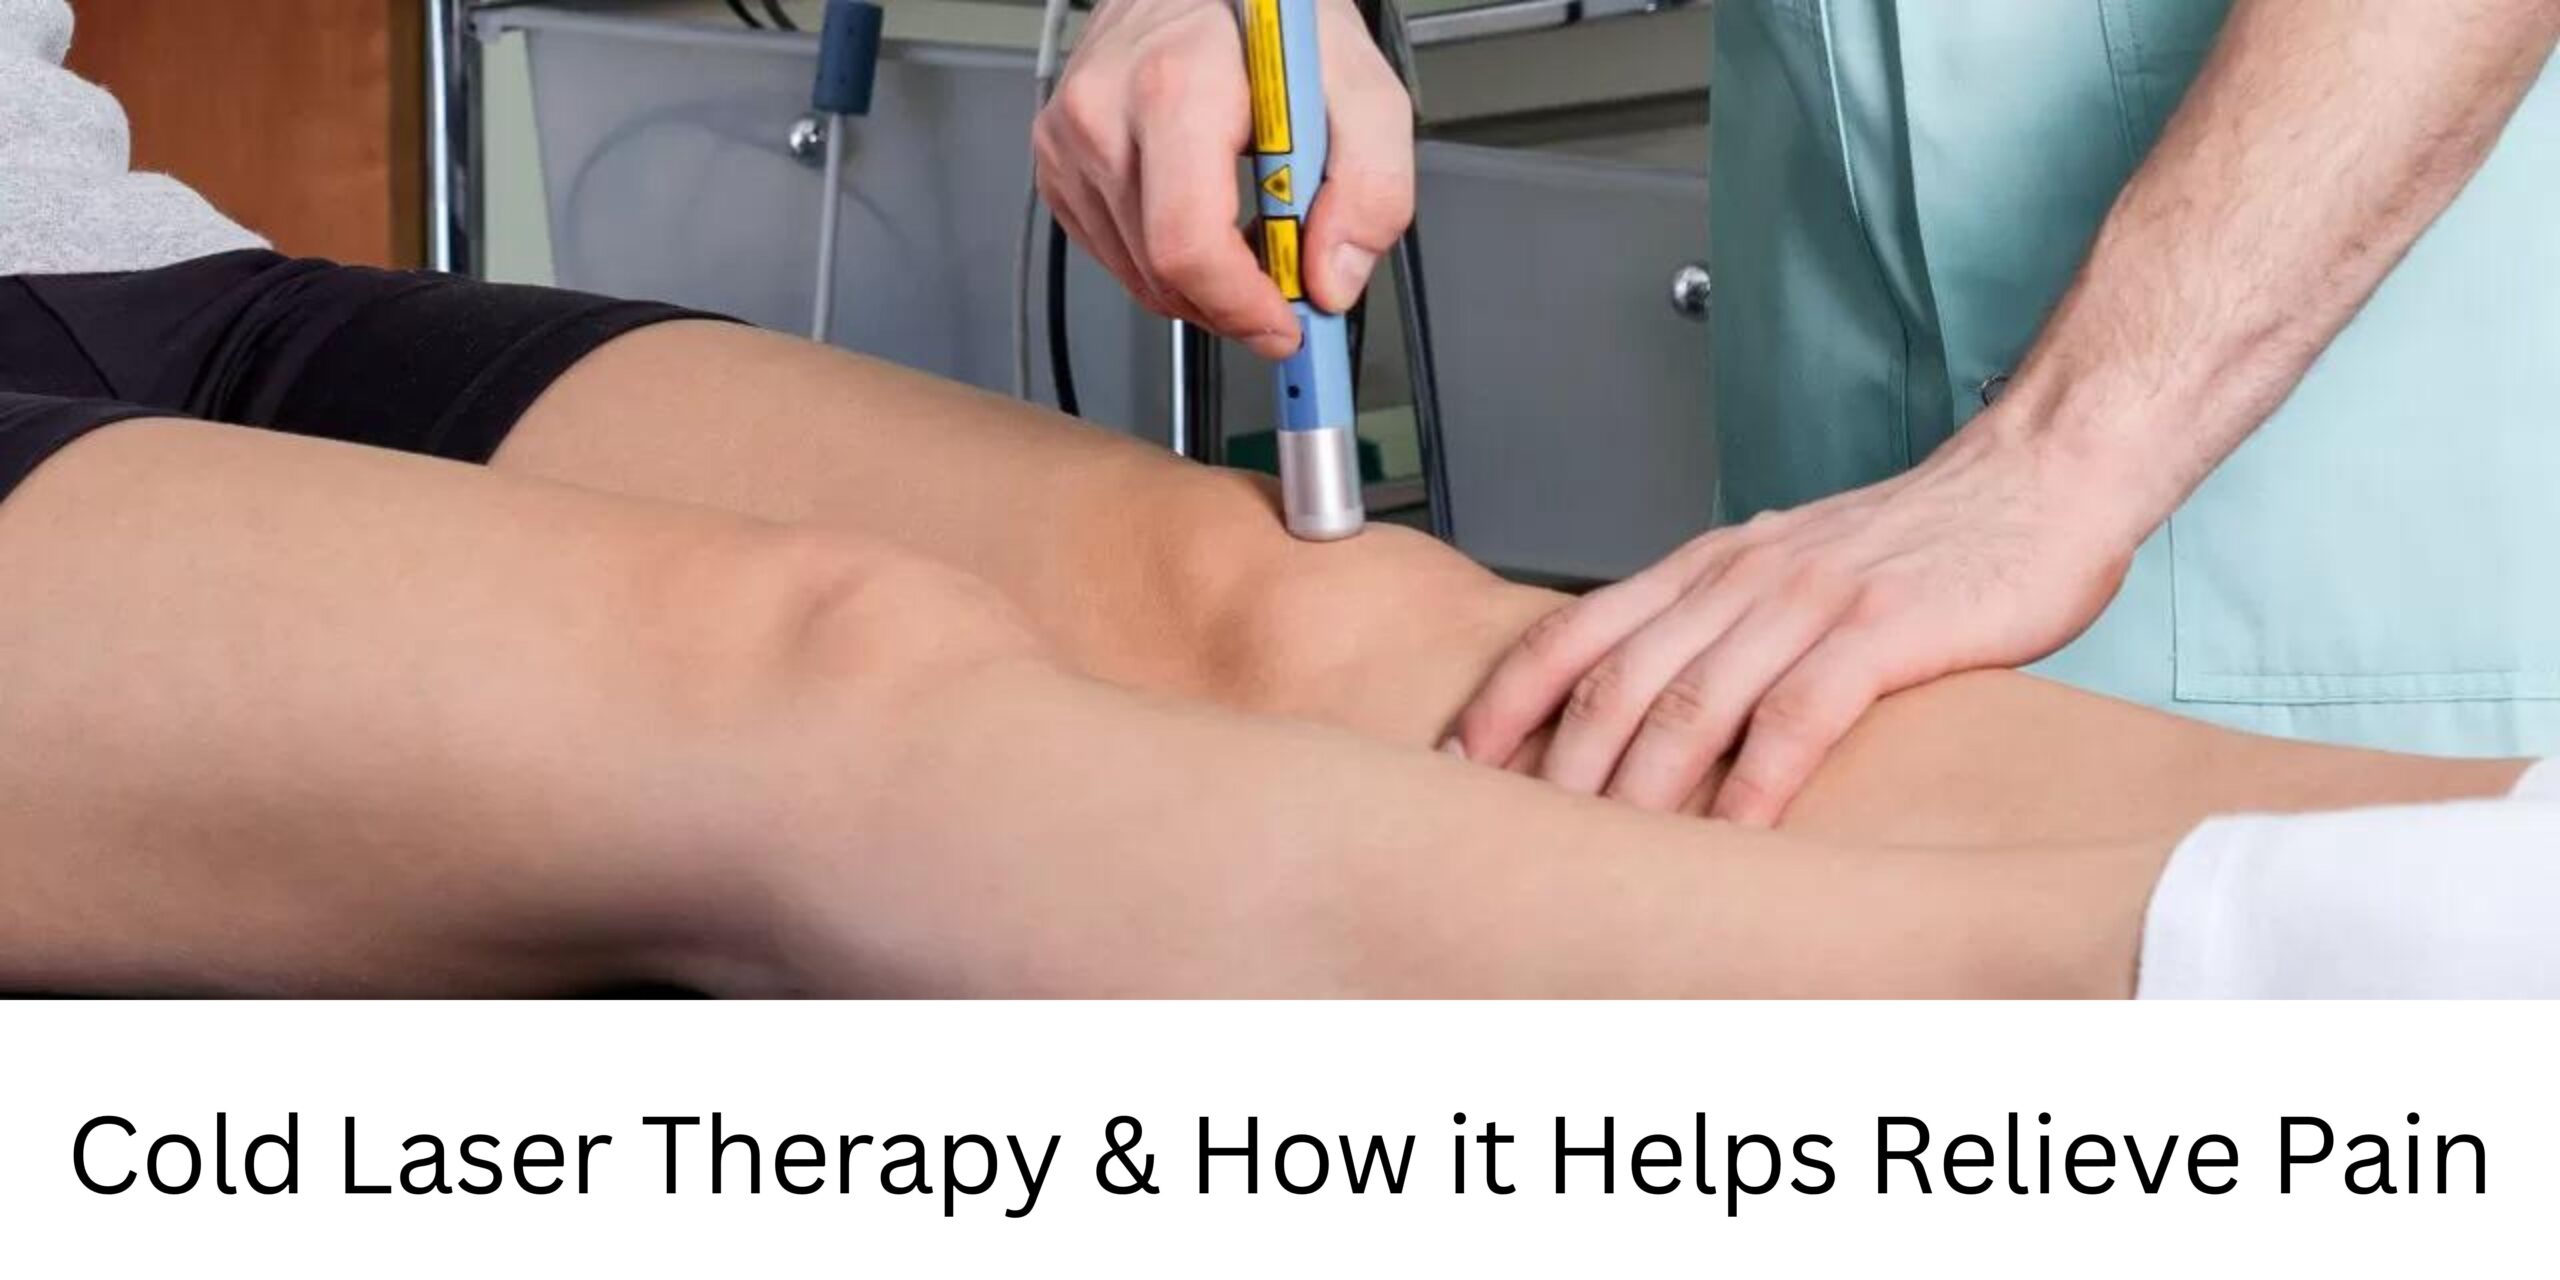 Cold Laser Therapy & How it Helps Relieve Pain